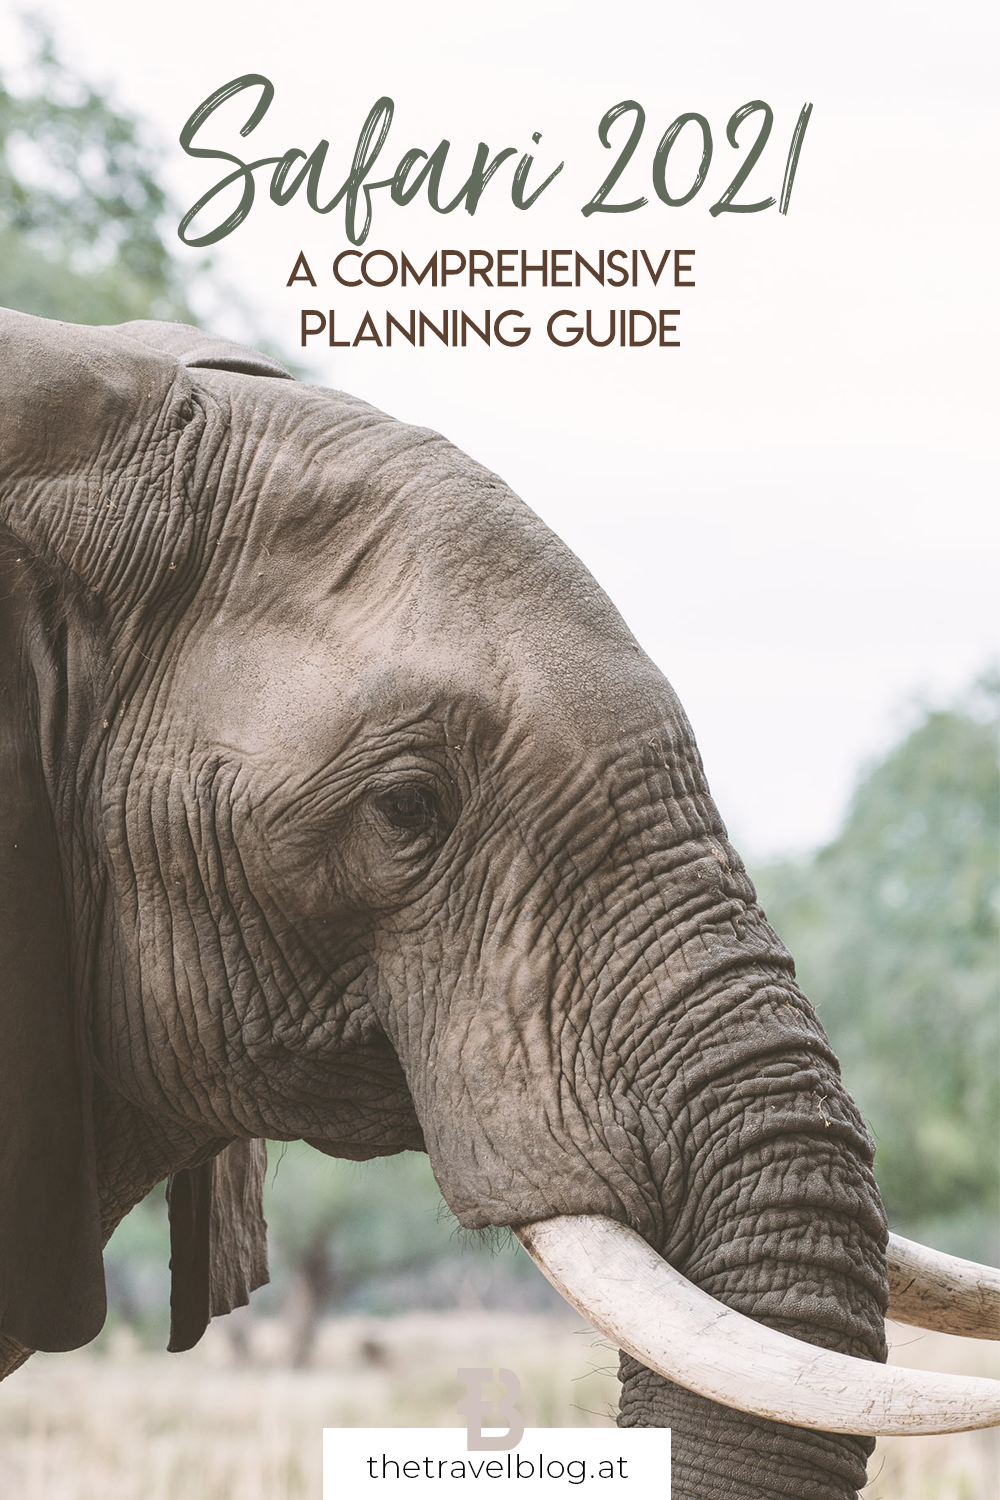 How to plan a safari in 2021 - a comprehensive guide to safari trips during COVID-19